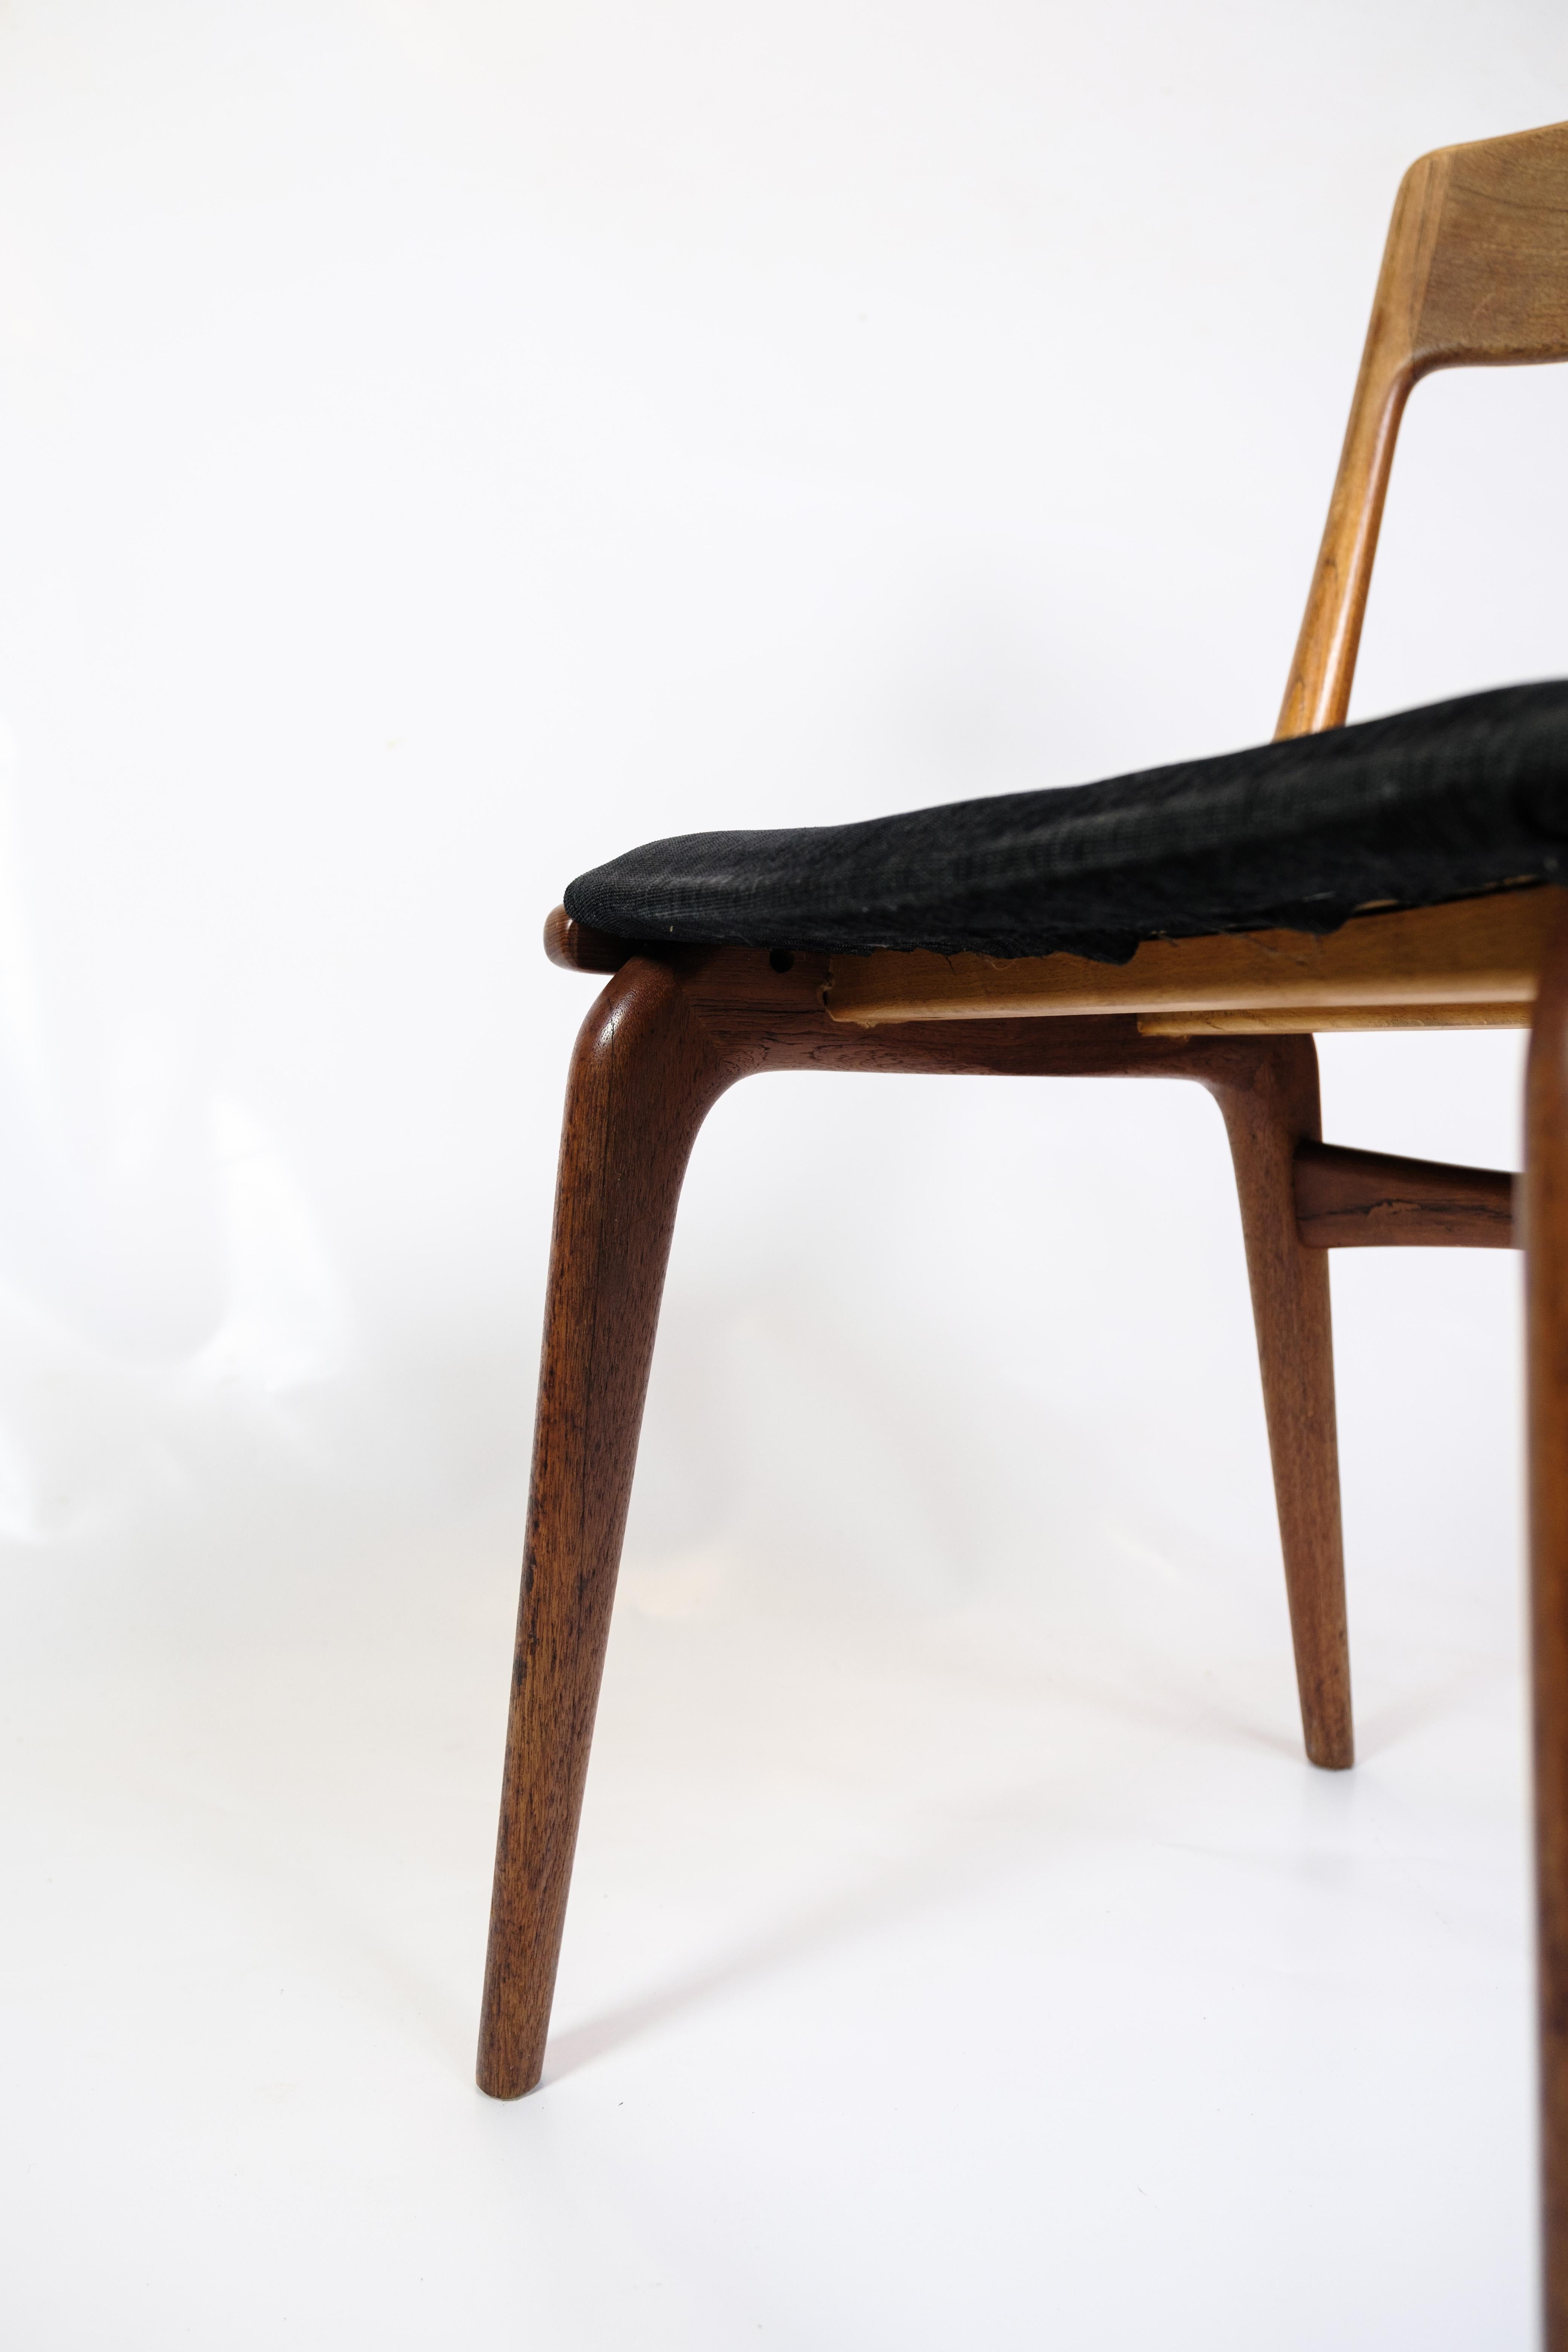 Leather Set Of 6 Dining Room Chairs Model 370 By Alfred Christensen From 1950s For Sale